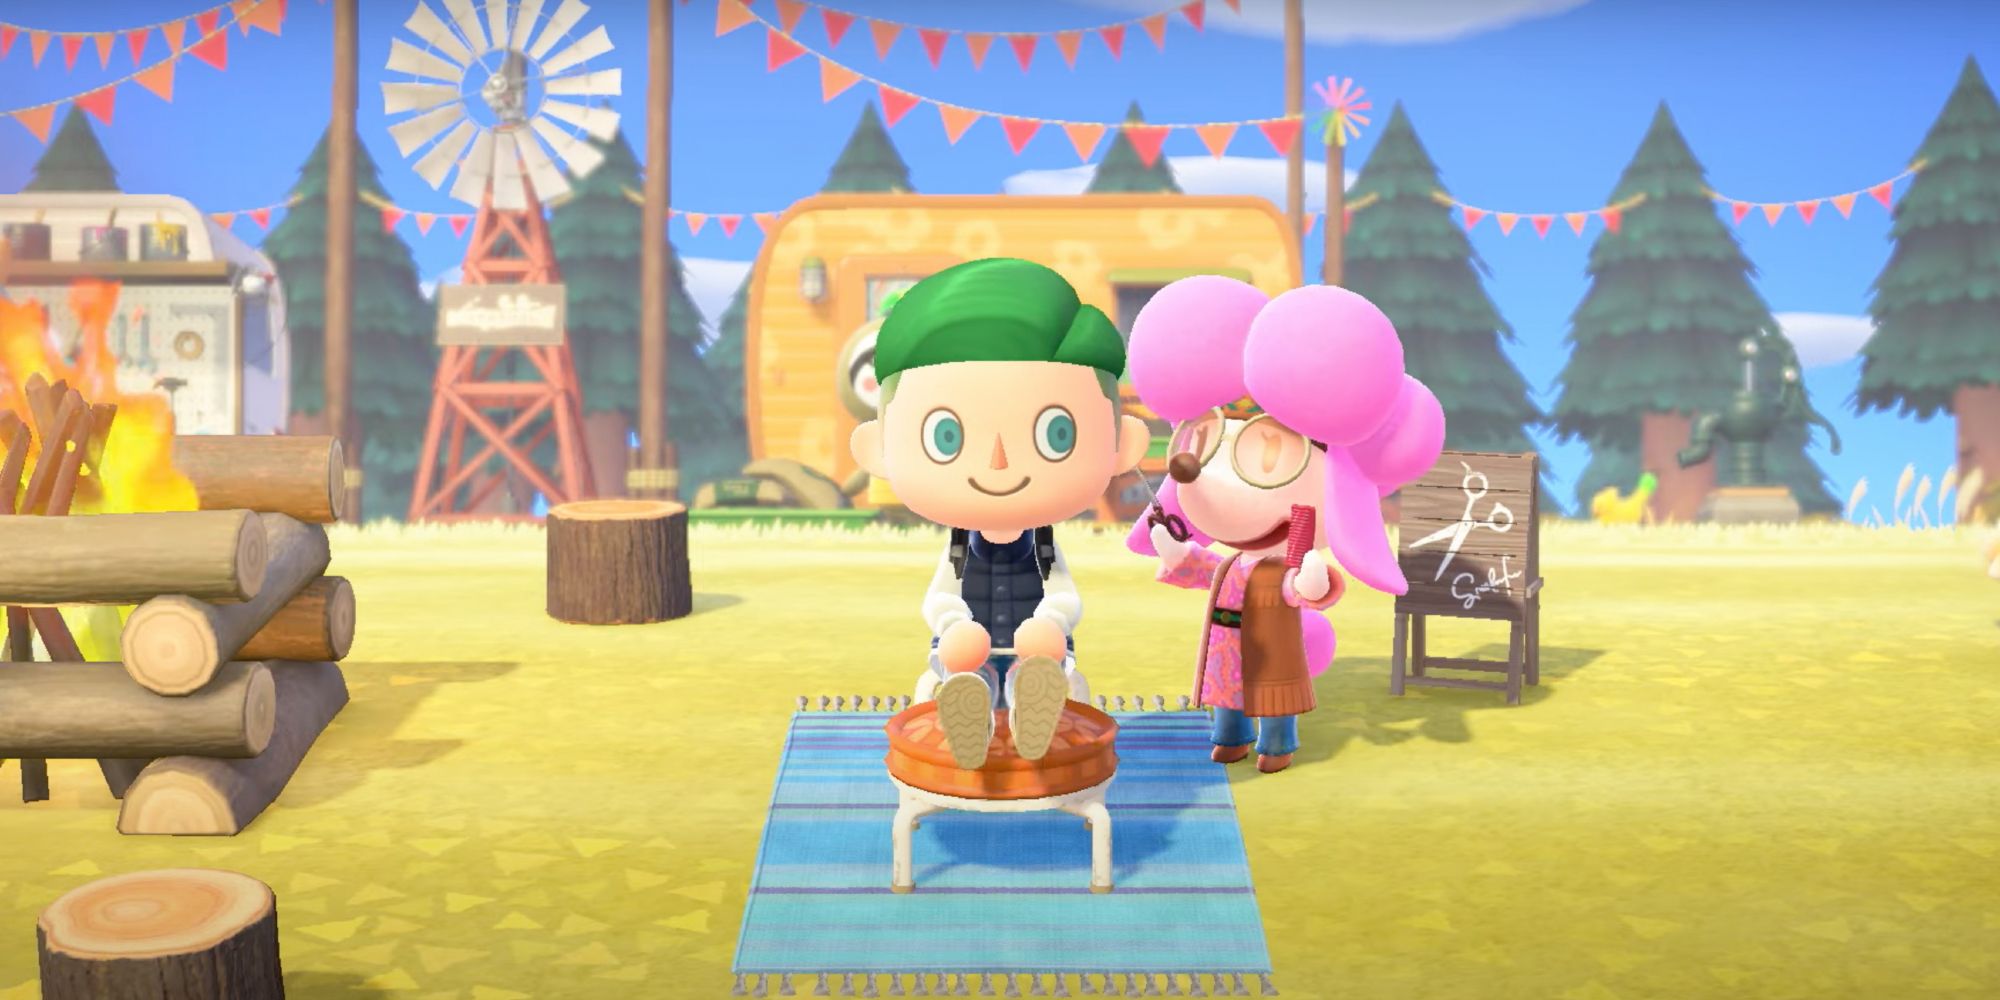 Tow villagers at the newly expanded Harv's Island in Animal Crossing Update